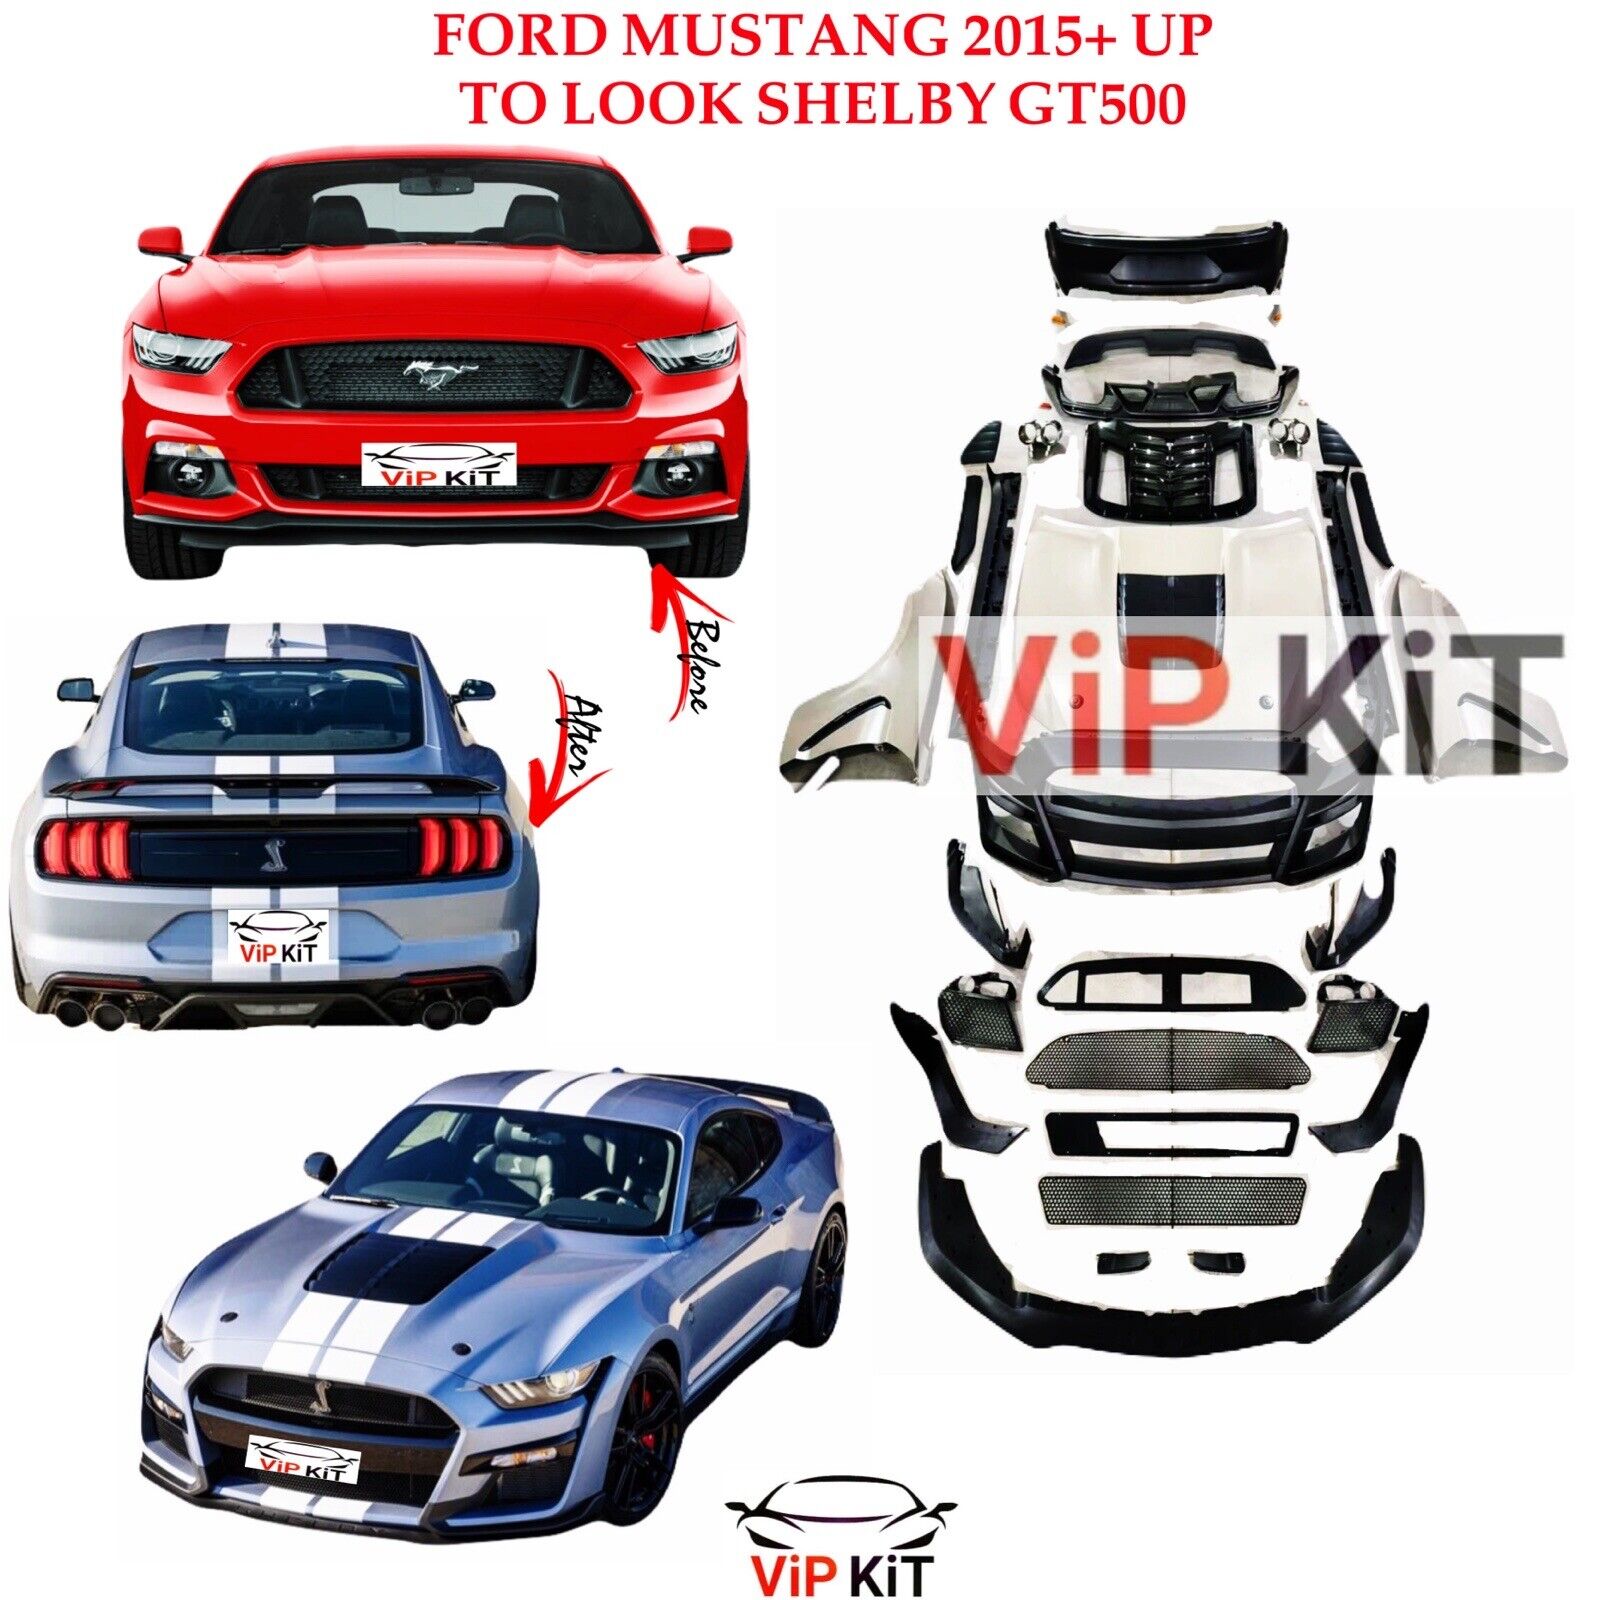 FORD MUSTANG 2015+ UP TO LOOK SHELBY GT500